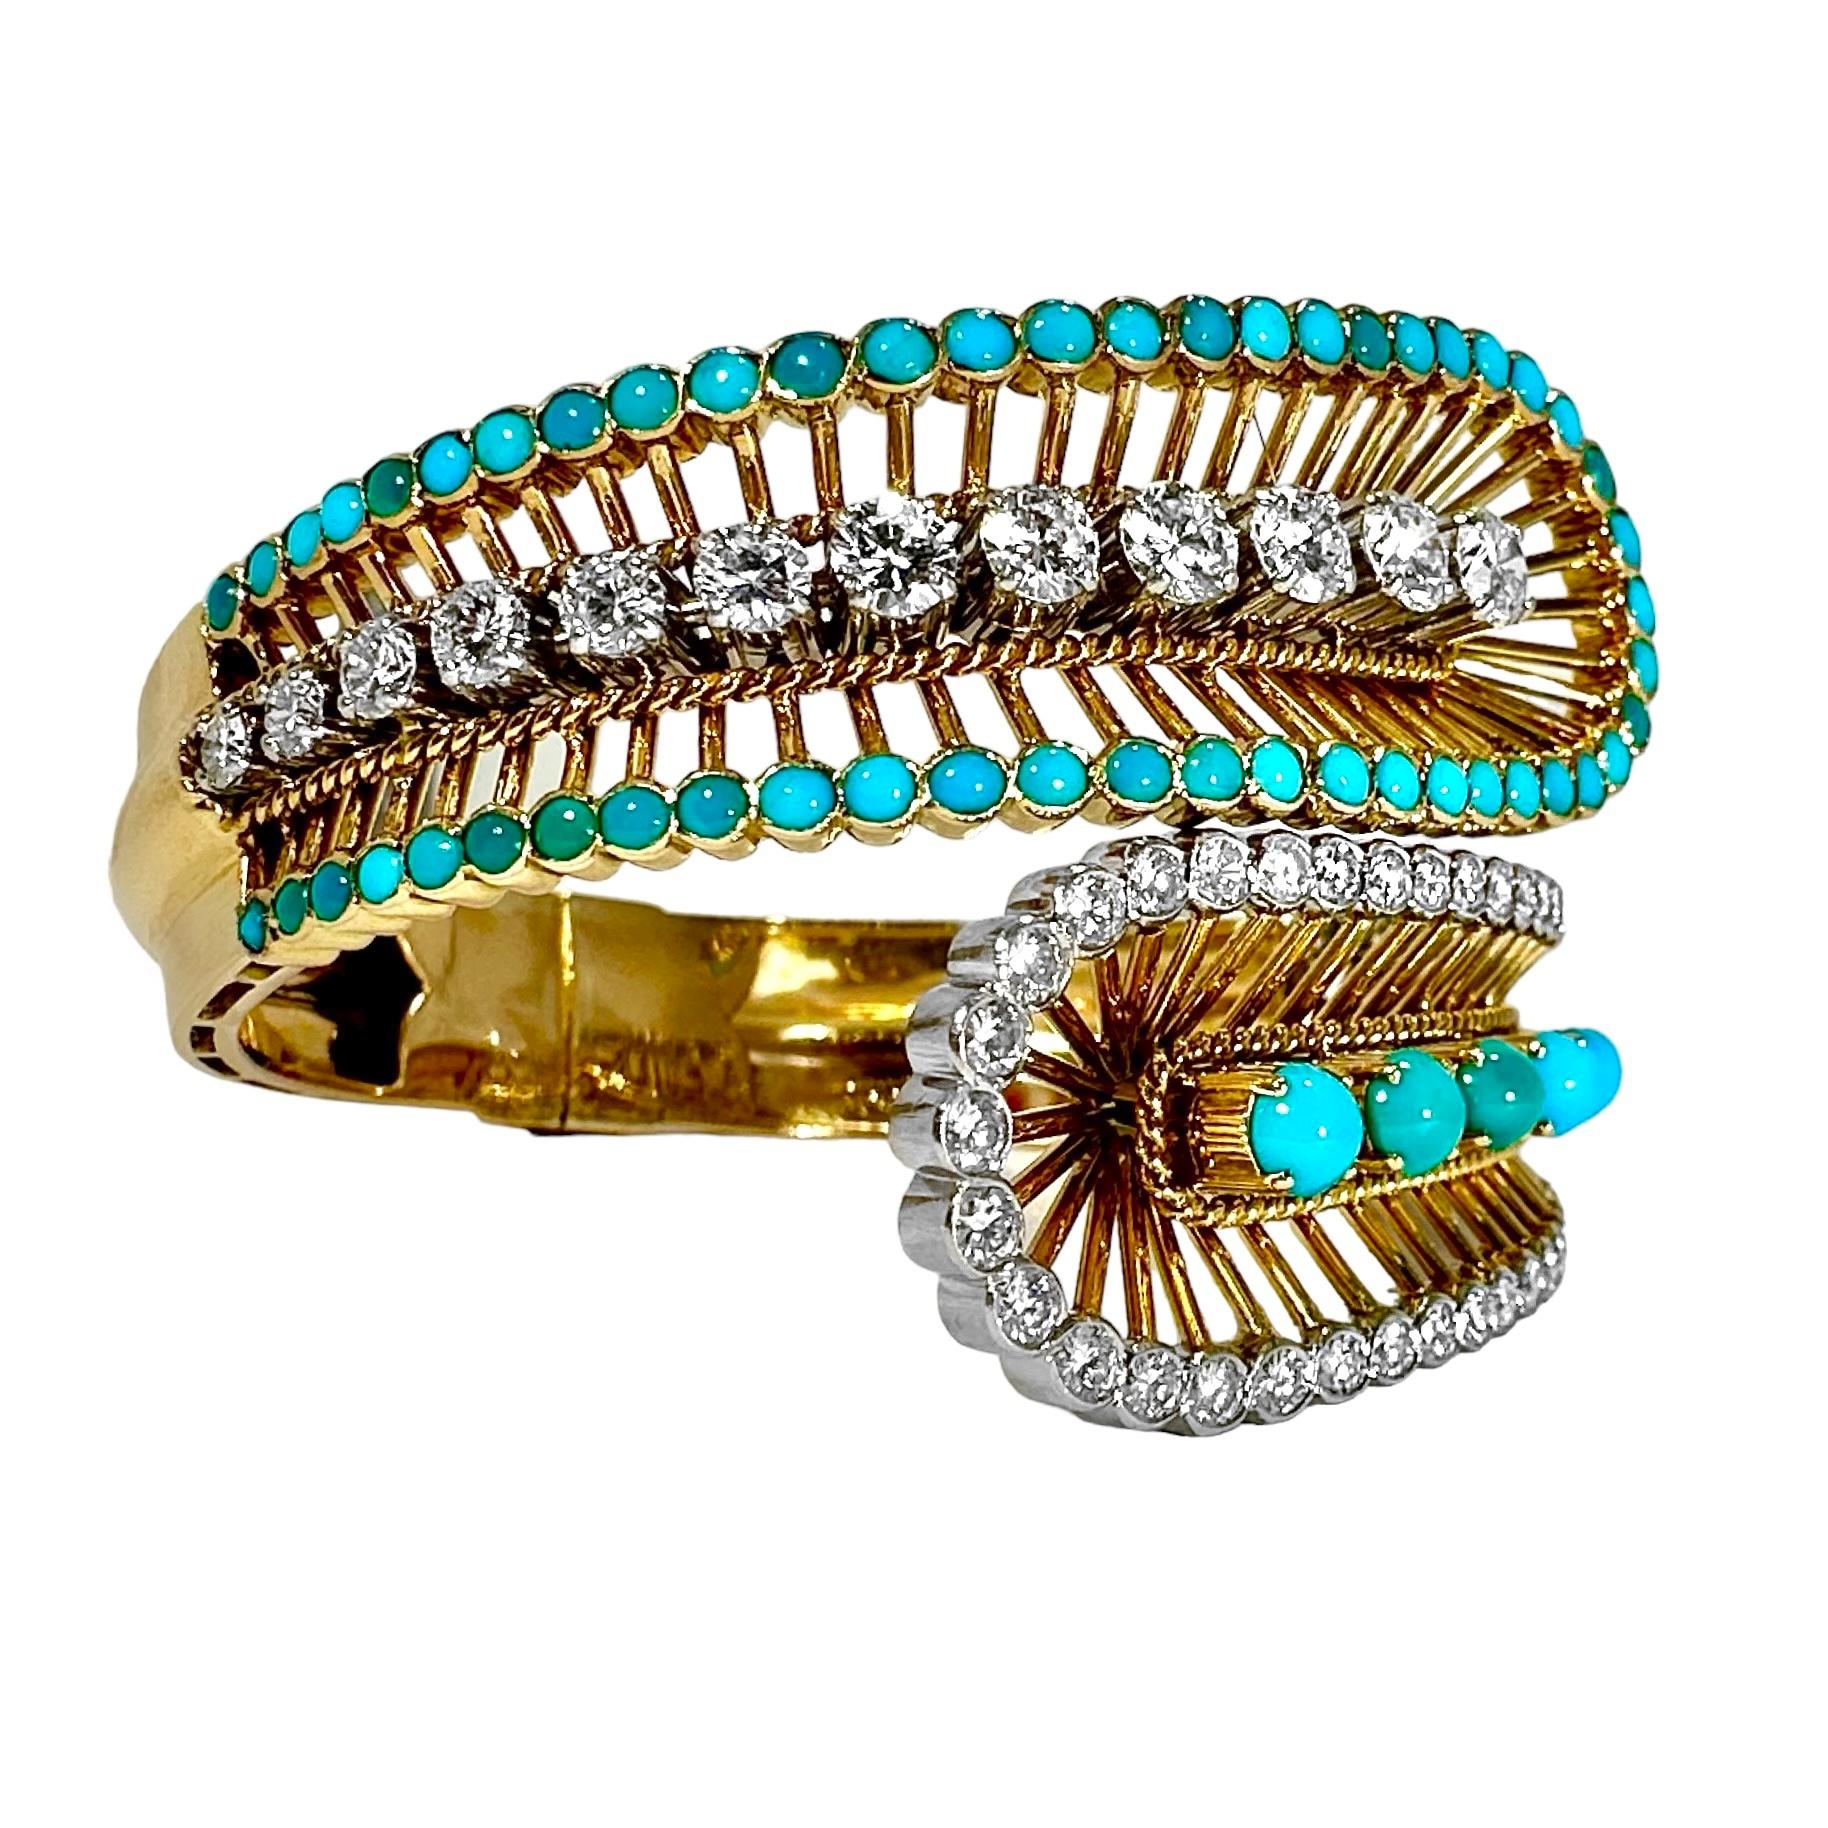 Elegant Wide Bypass Cuff in Gold, Turquoise & Diamonds by Greek Maker VOURAKIS  1